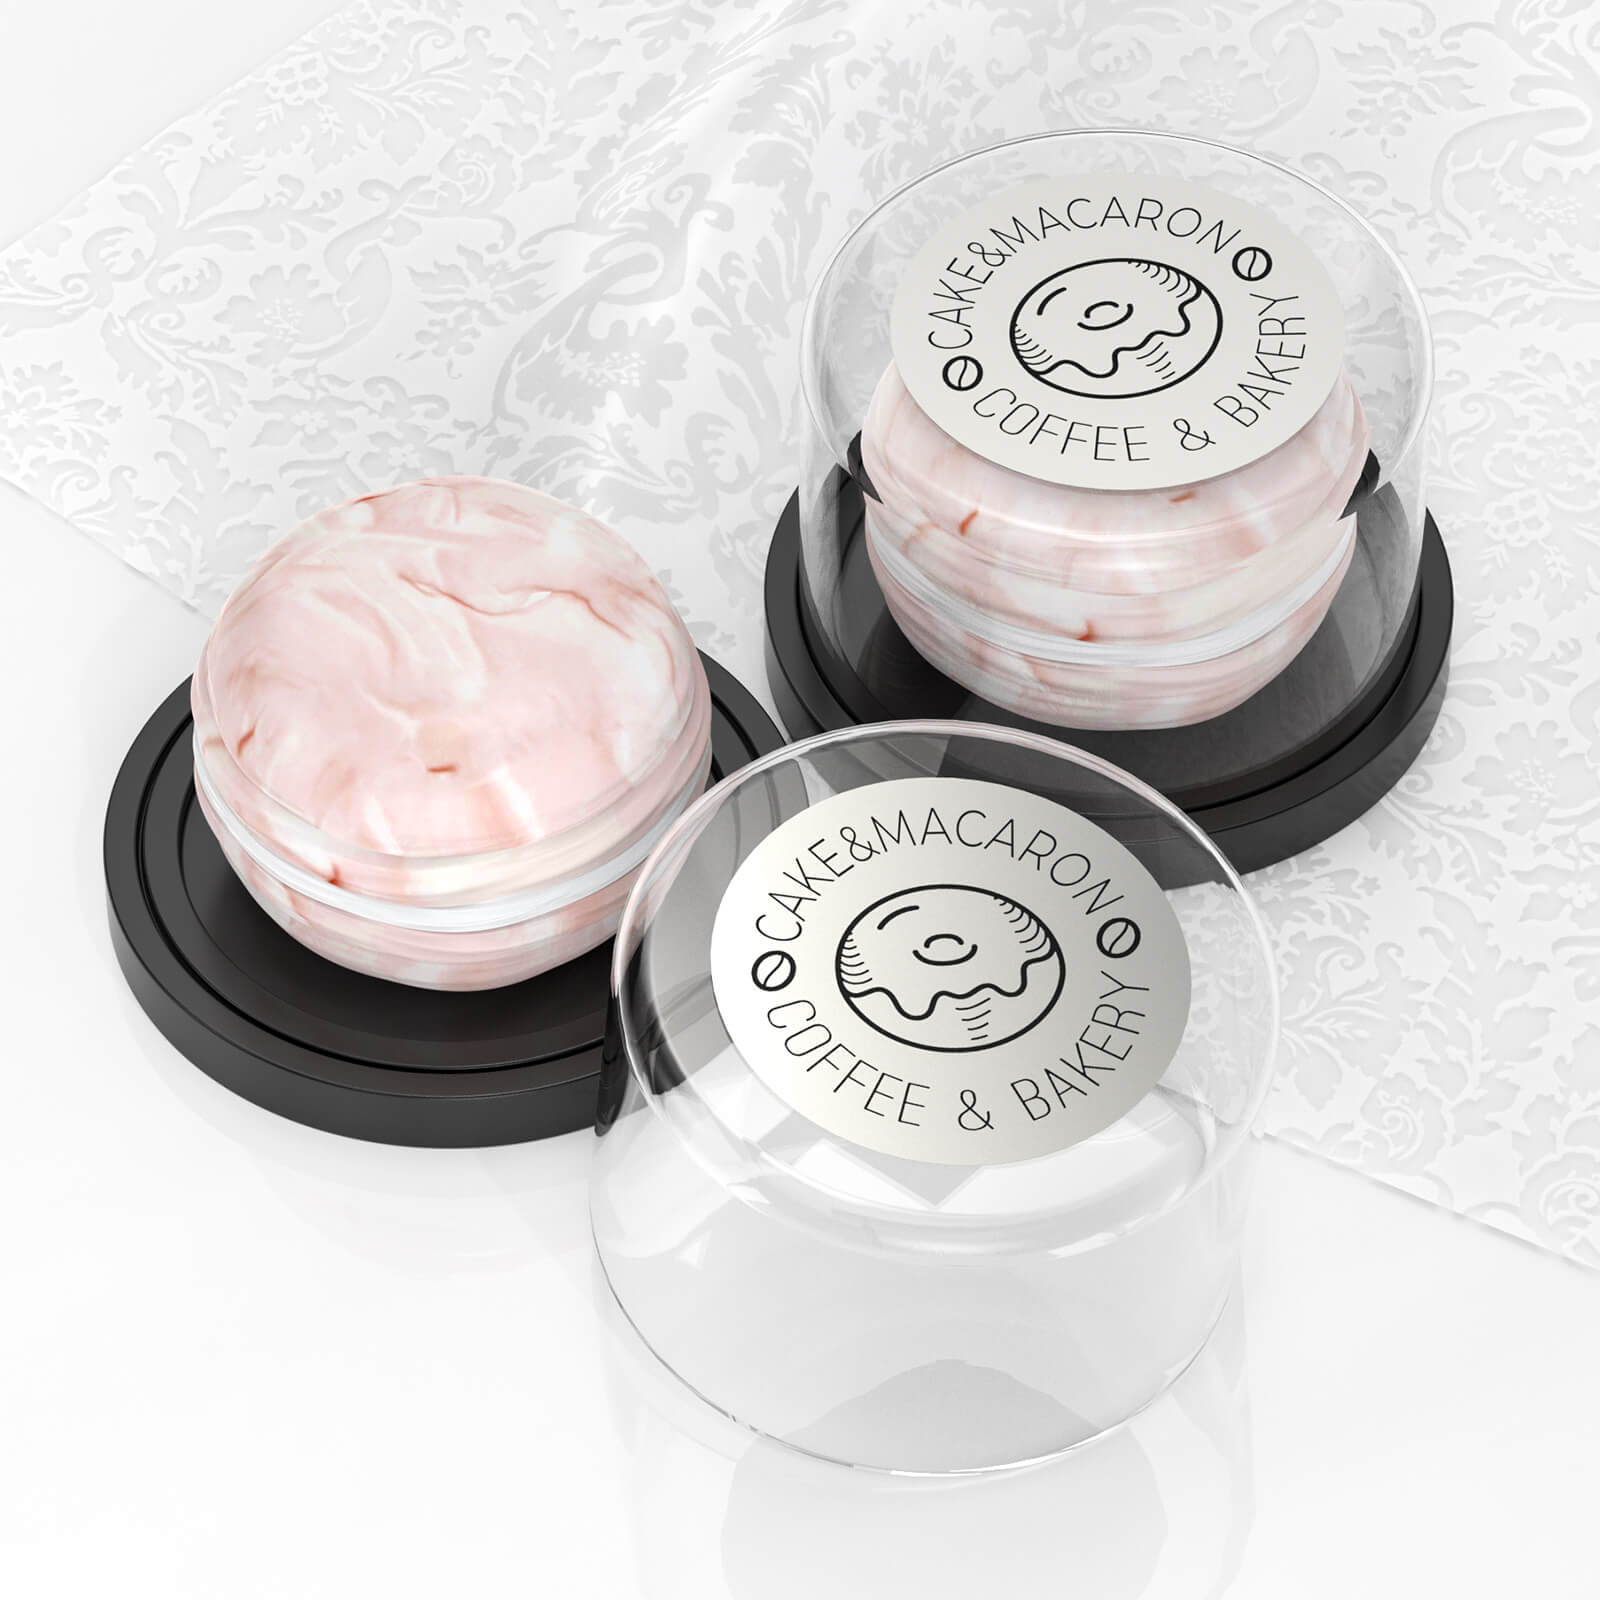 MUNBYN silver round thermal labels are perfect for brand labels on cupcakes.